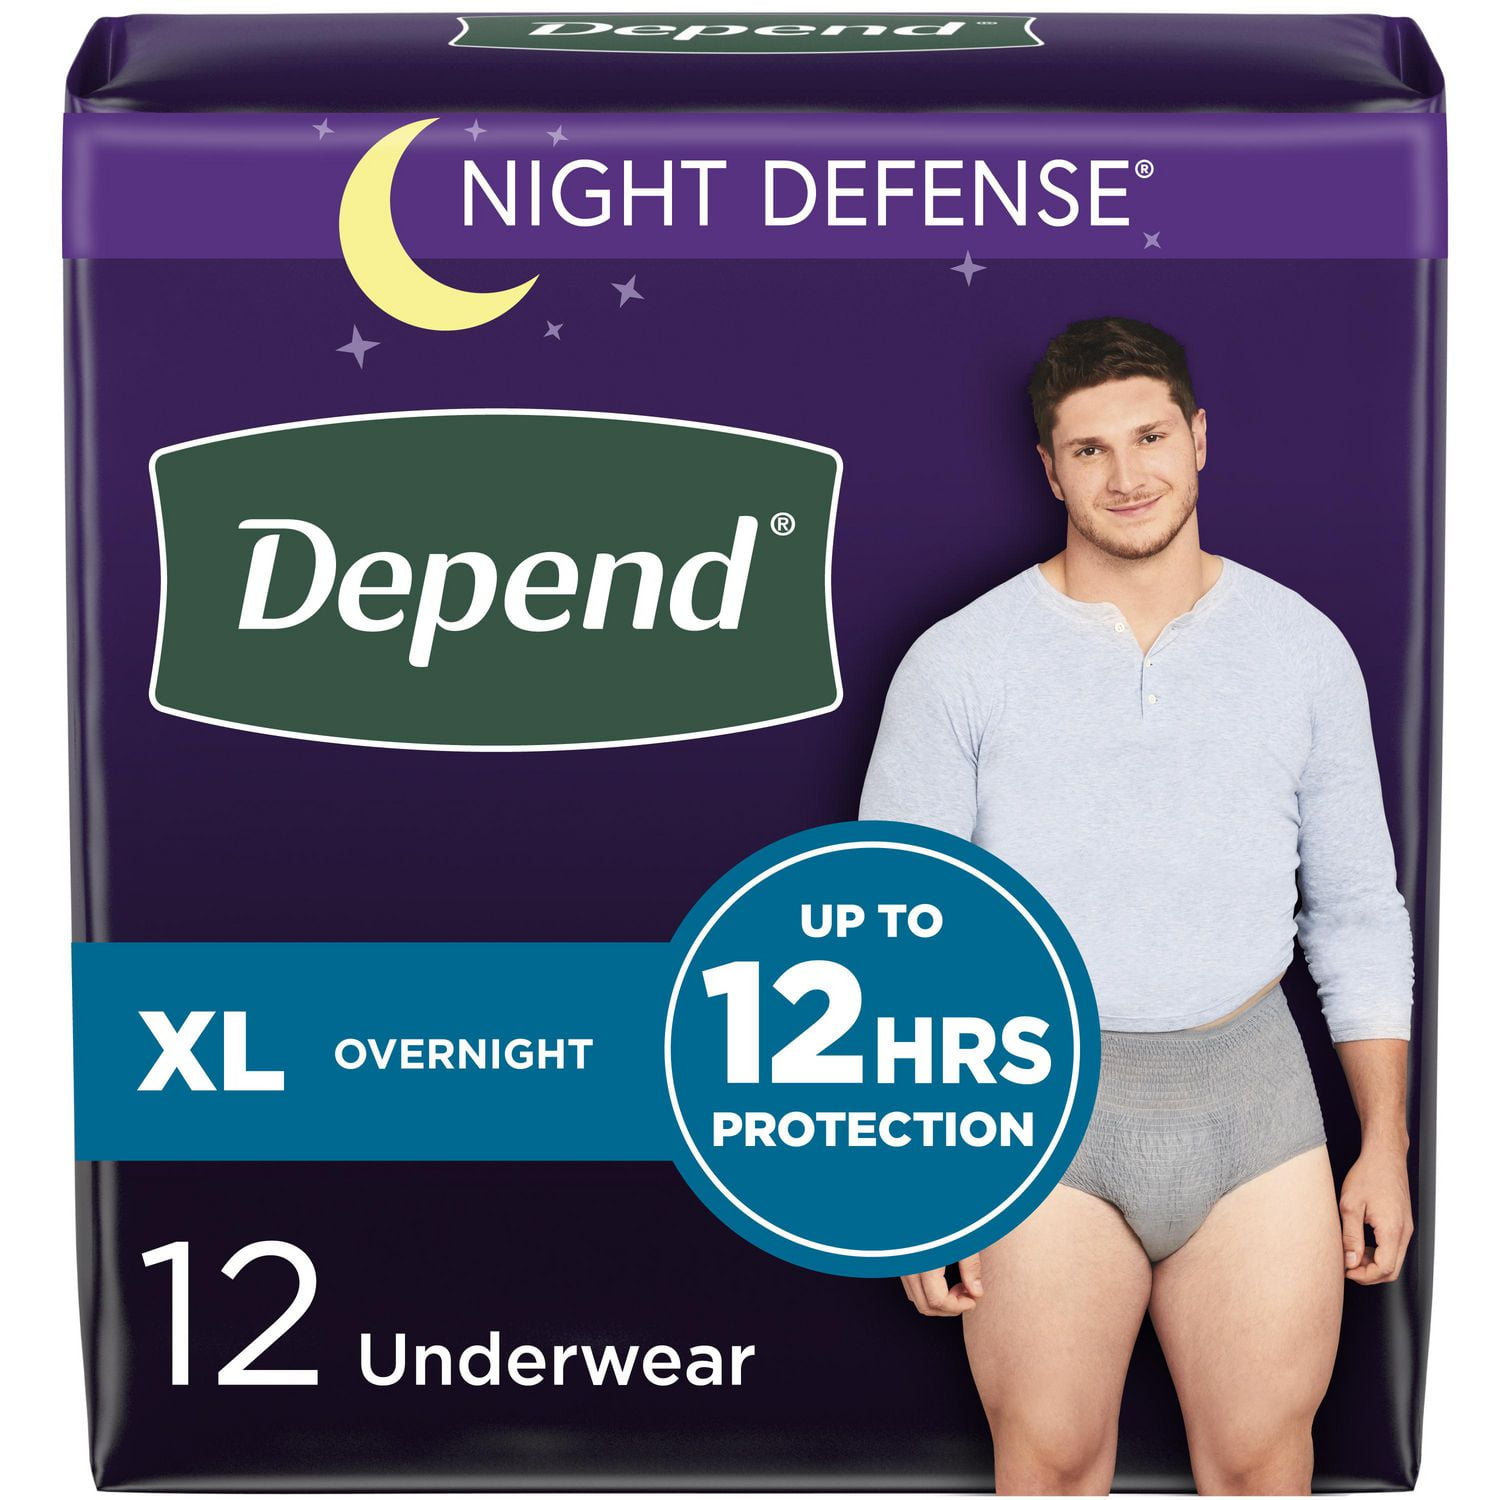 Get 【2 Packs Deal】Sofy Breathable Disposable Overnight Period Underwear  Size M/L 2 count Delivered